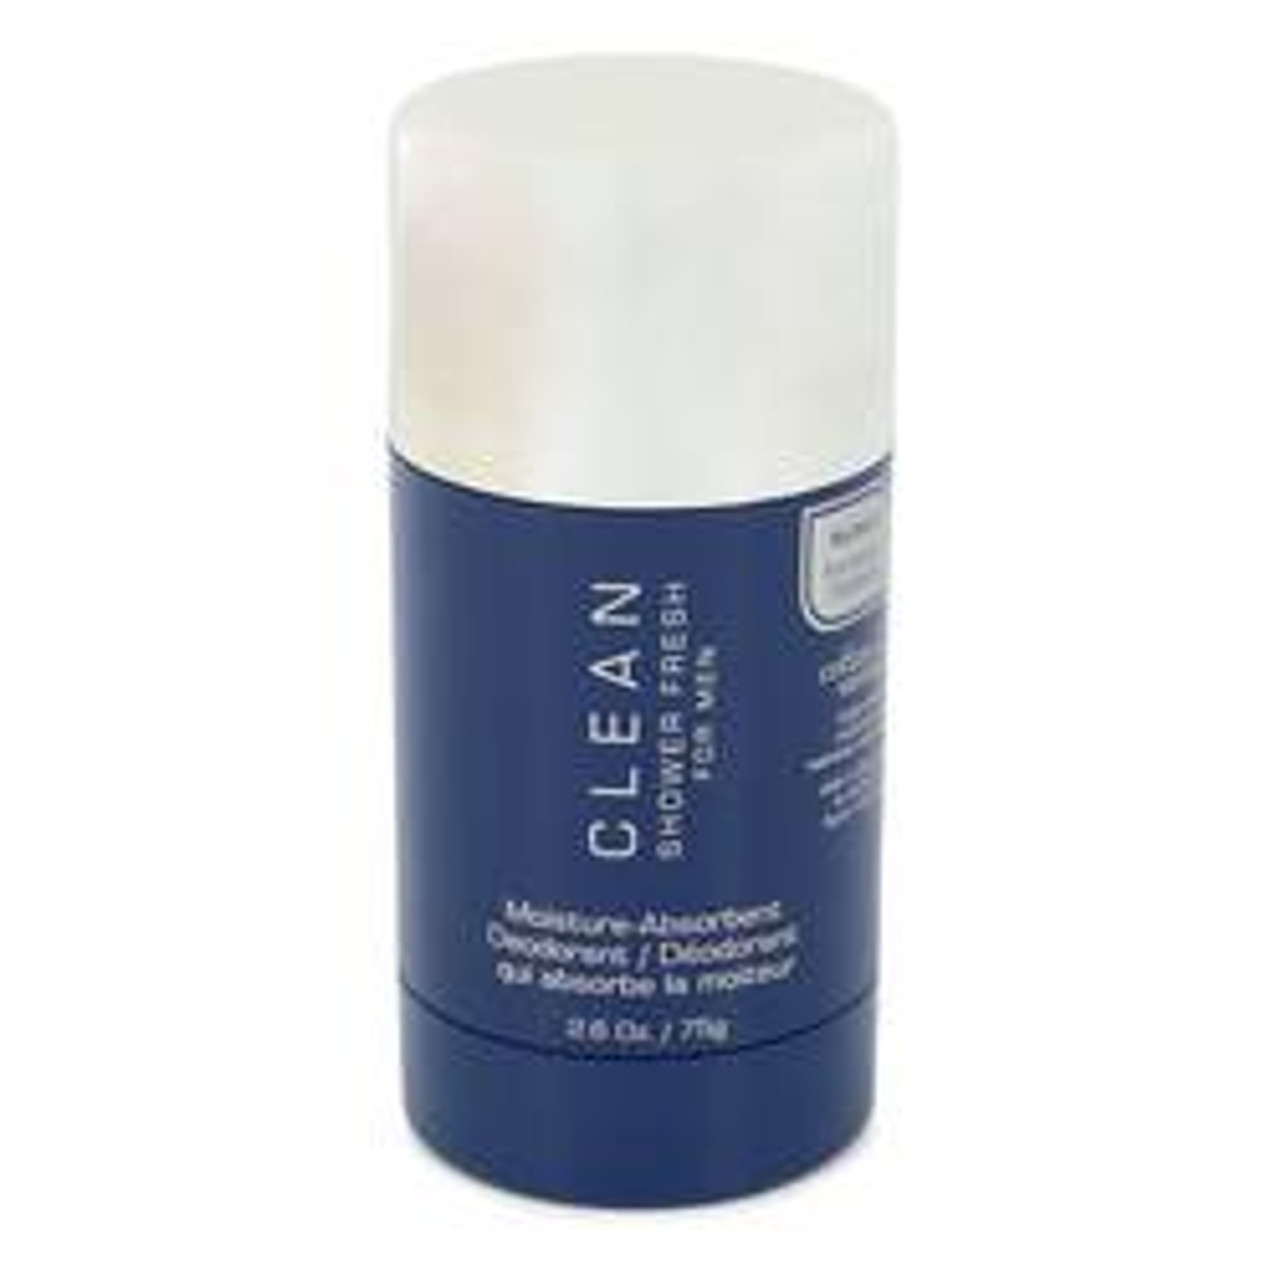 Clean Shower Fresh Cologne By Clean Deodorant Stick 2.6 oz for Men - [From 35.00 - Choose pk Qty ] - *Ships from Miami